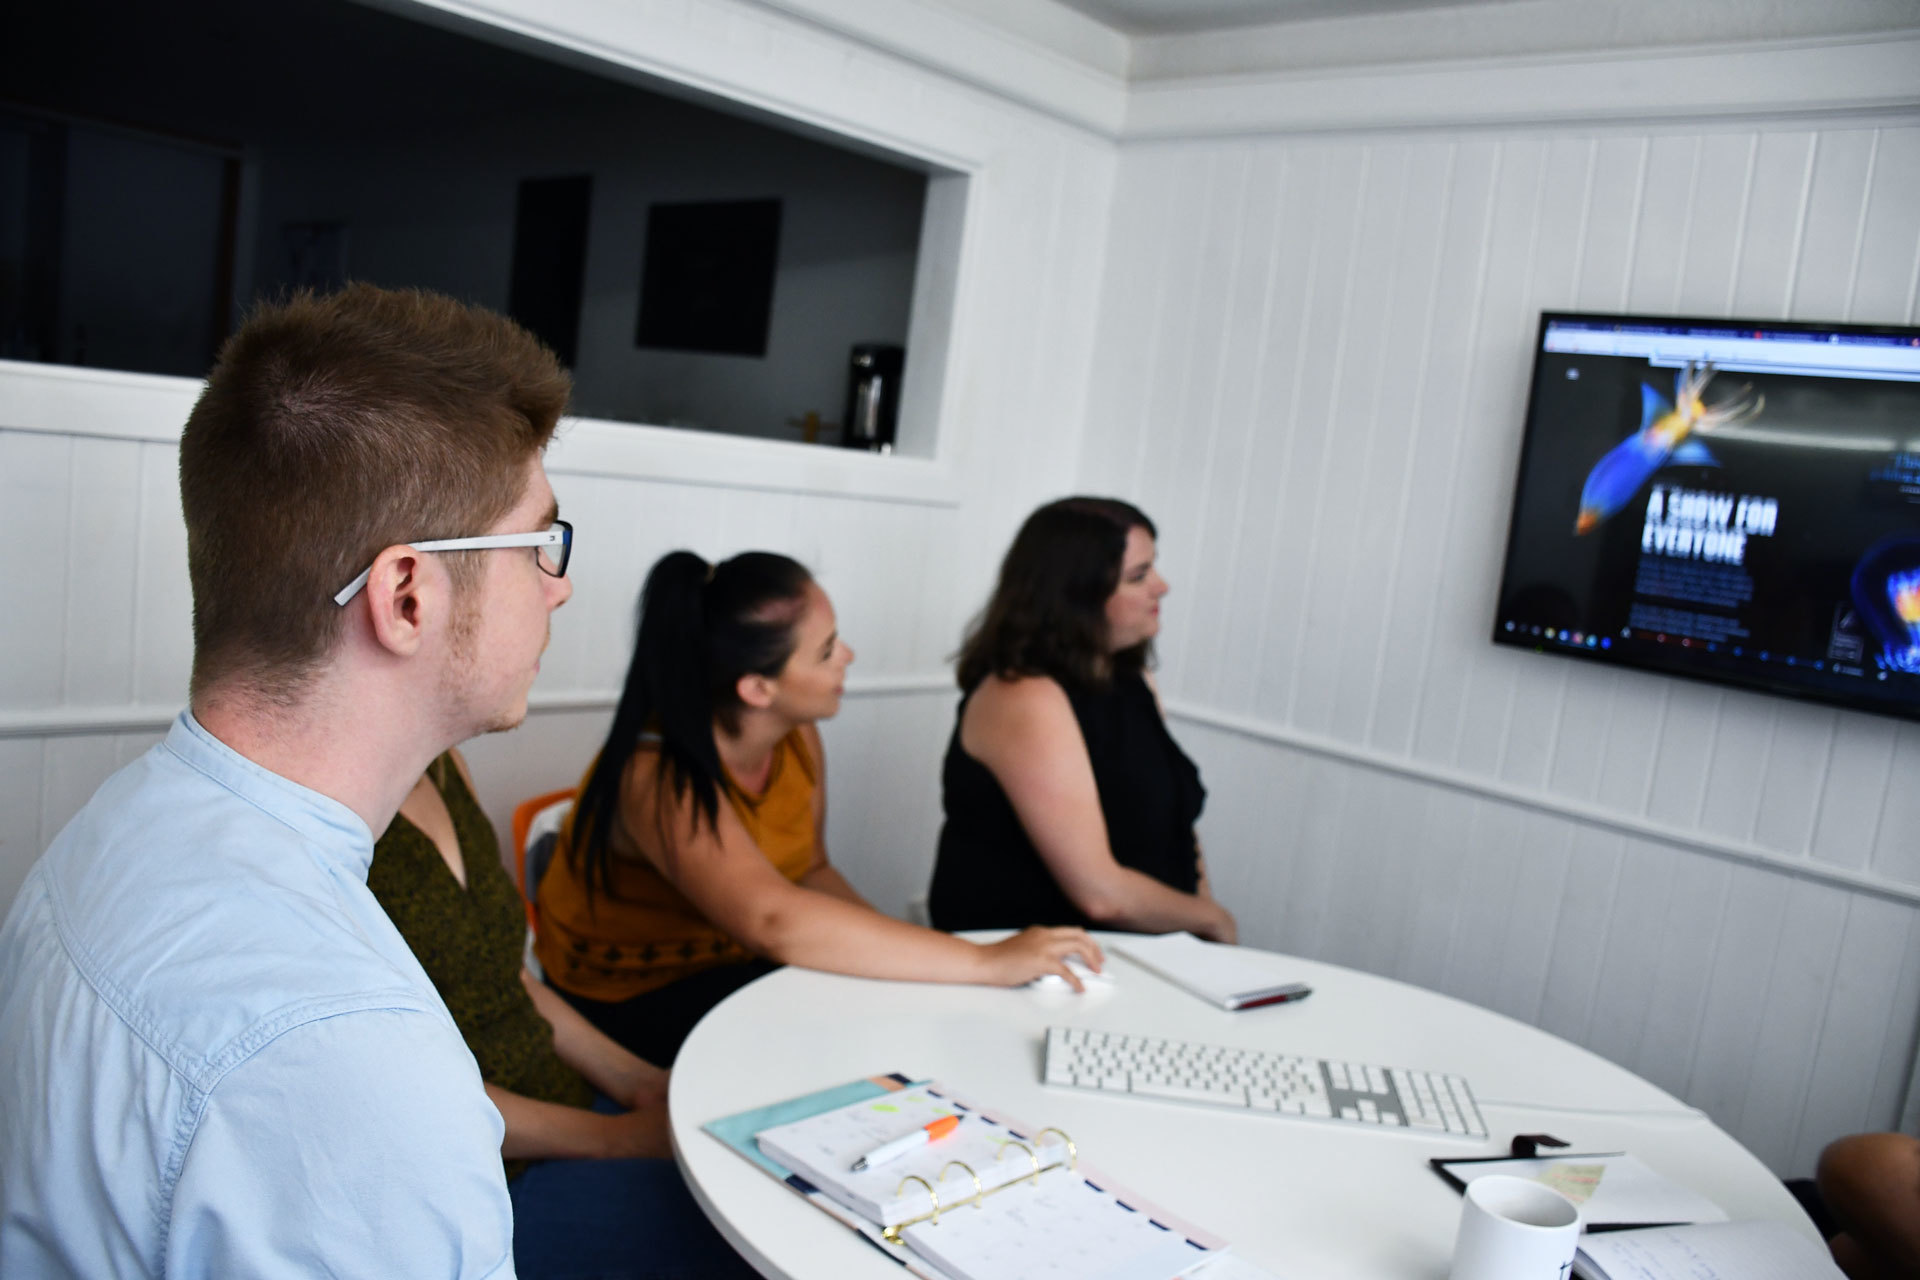 Three staff members looking at a presentation on the television screen